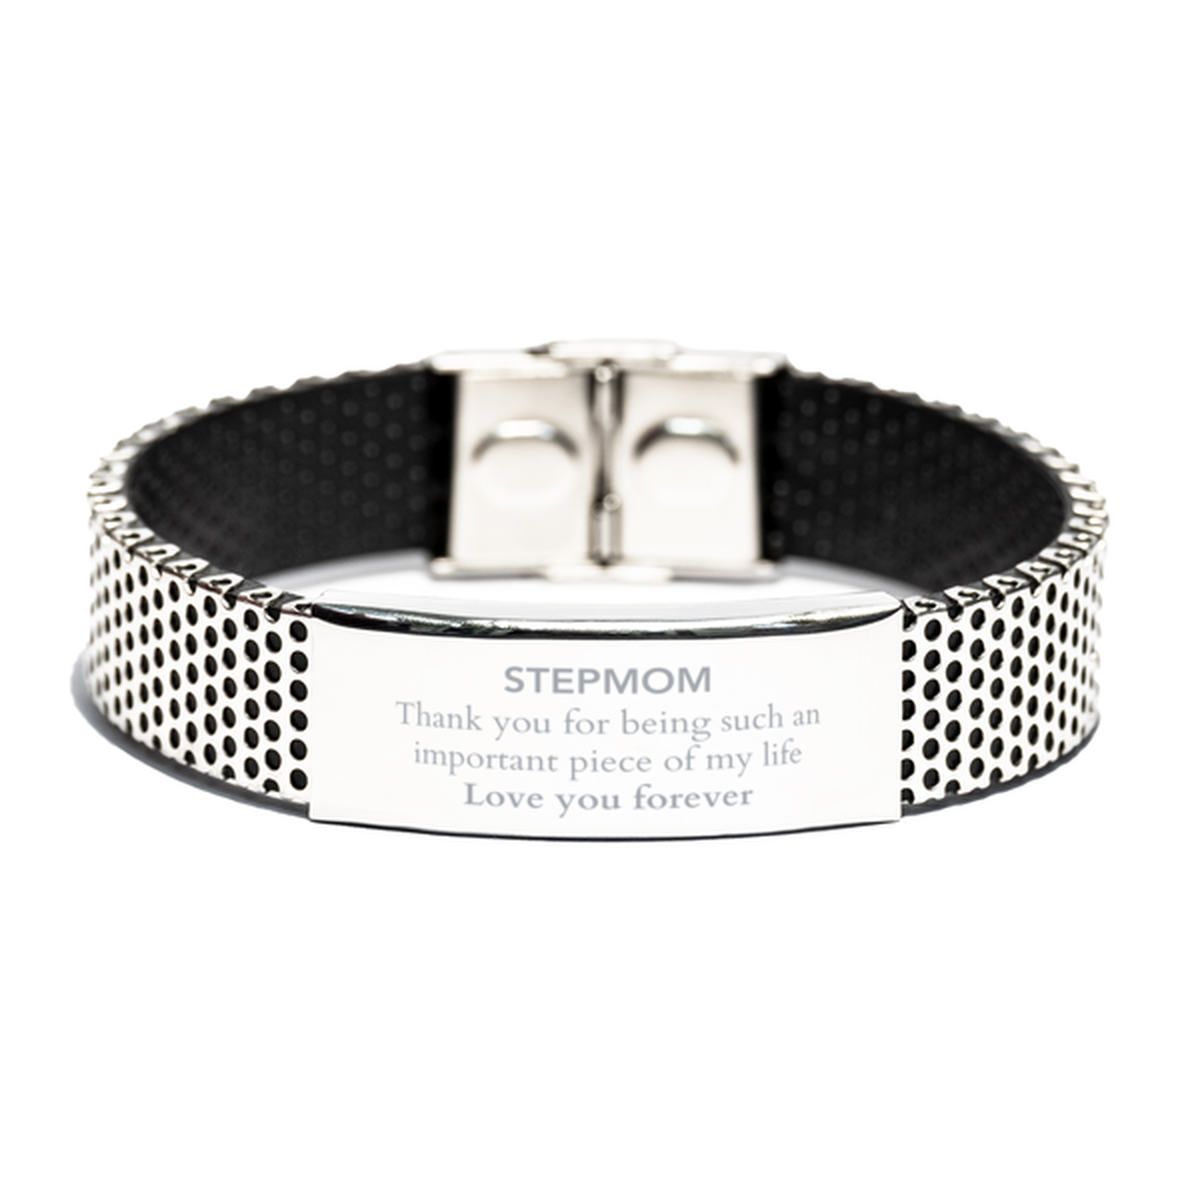 Appropriate Stepmom Stainless Steel Bracelet Epic Birthday Gifts for Stepmom Thank you for being such an important piece of my life Stepmom Christmas Mothers Fathers Day